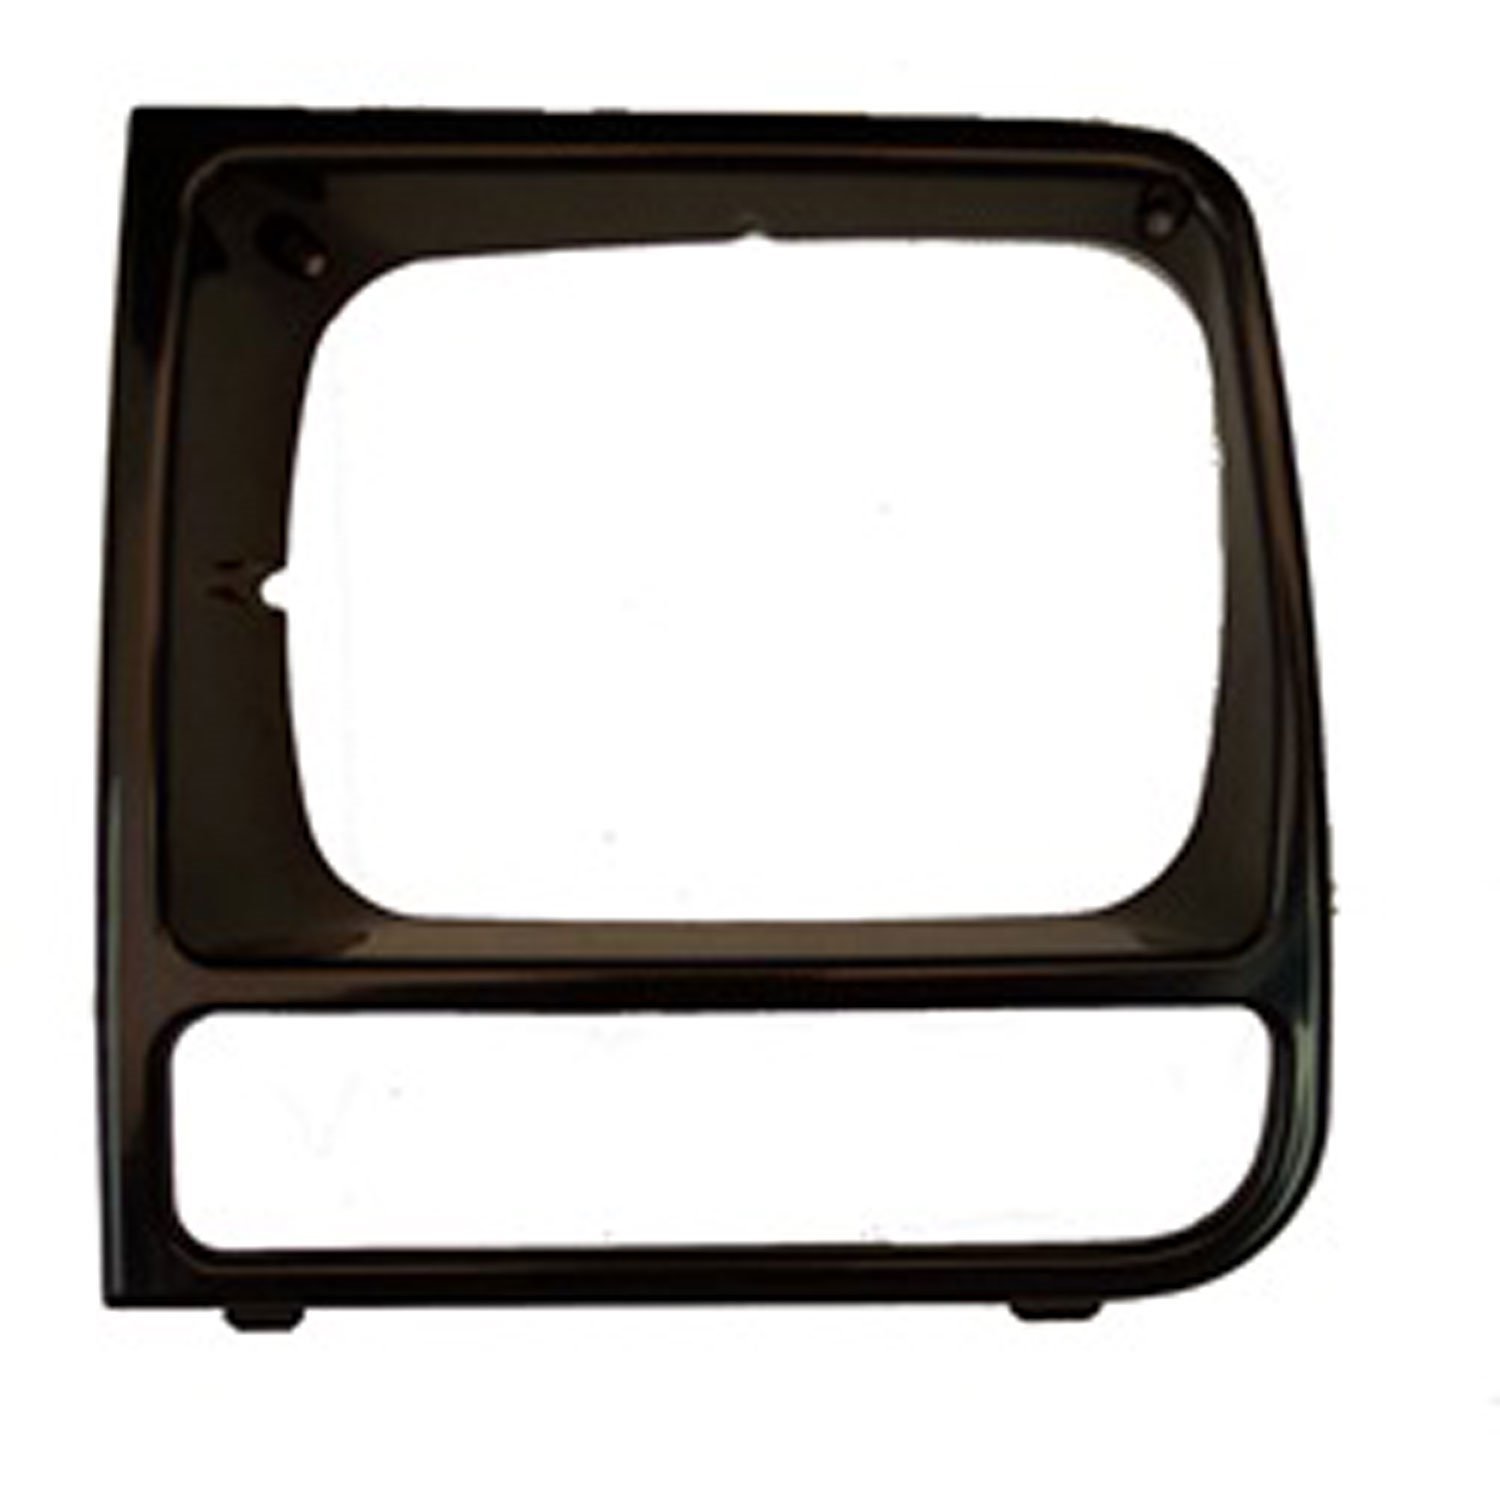 This black headlight bezel from Omix-ADA fits the left side on 97-01 Jeep Cherokee XJ.